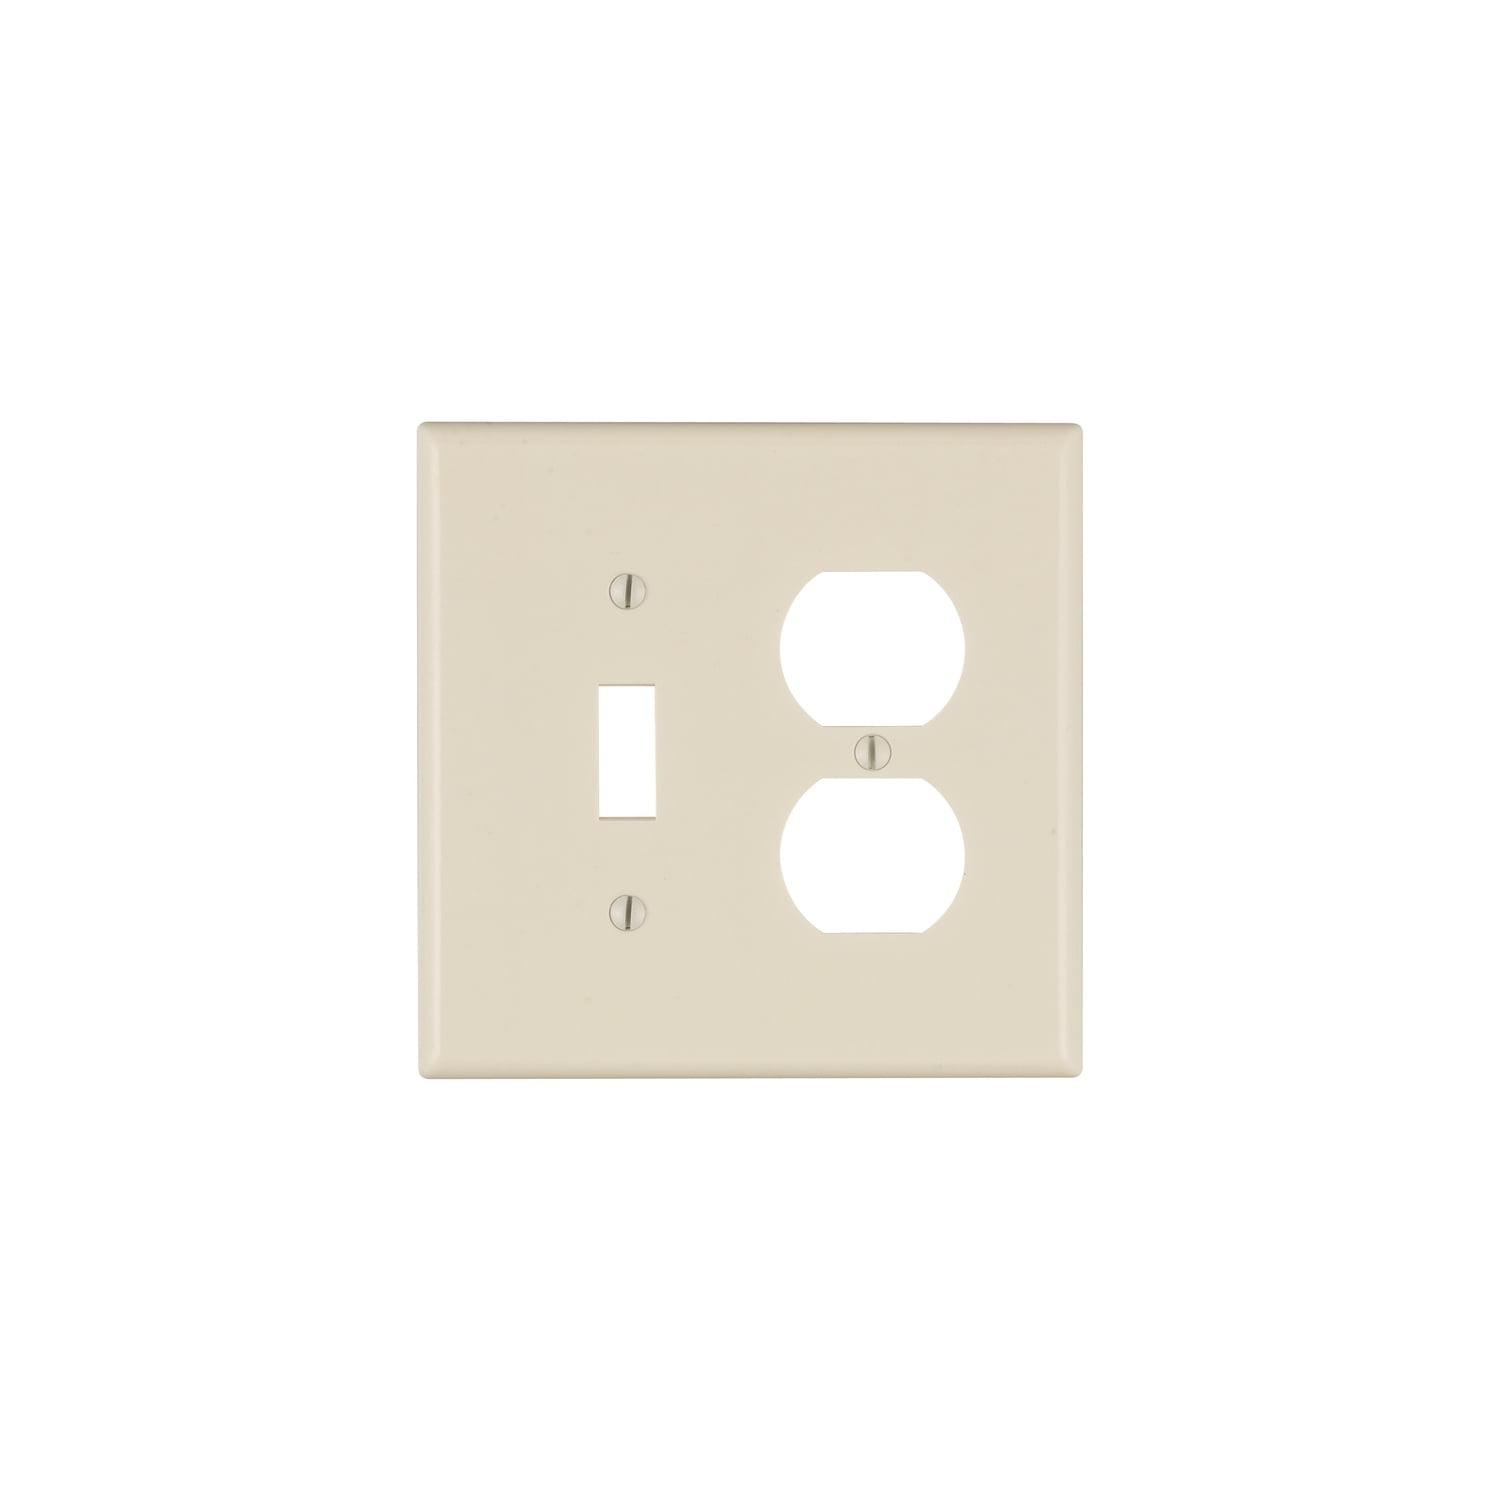 SLATER STA-KLEEN BEIGE 2 GANG TOGGLE SWITCH WALL PLATE 2 PLATES 